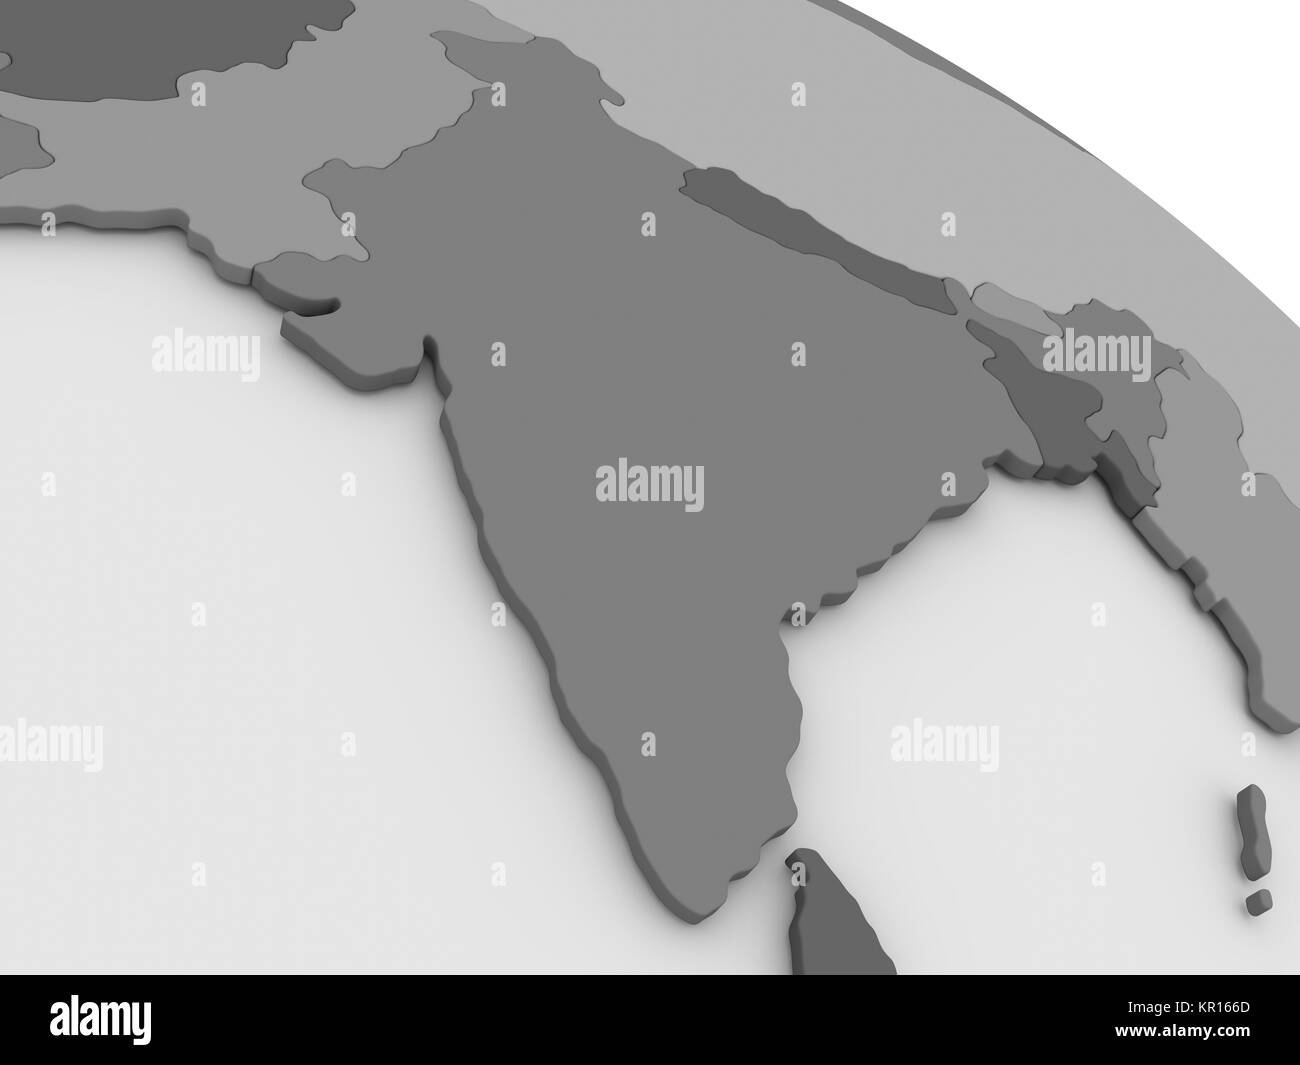 India on grey 3D map Stock Photo